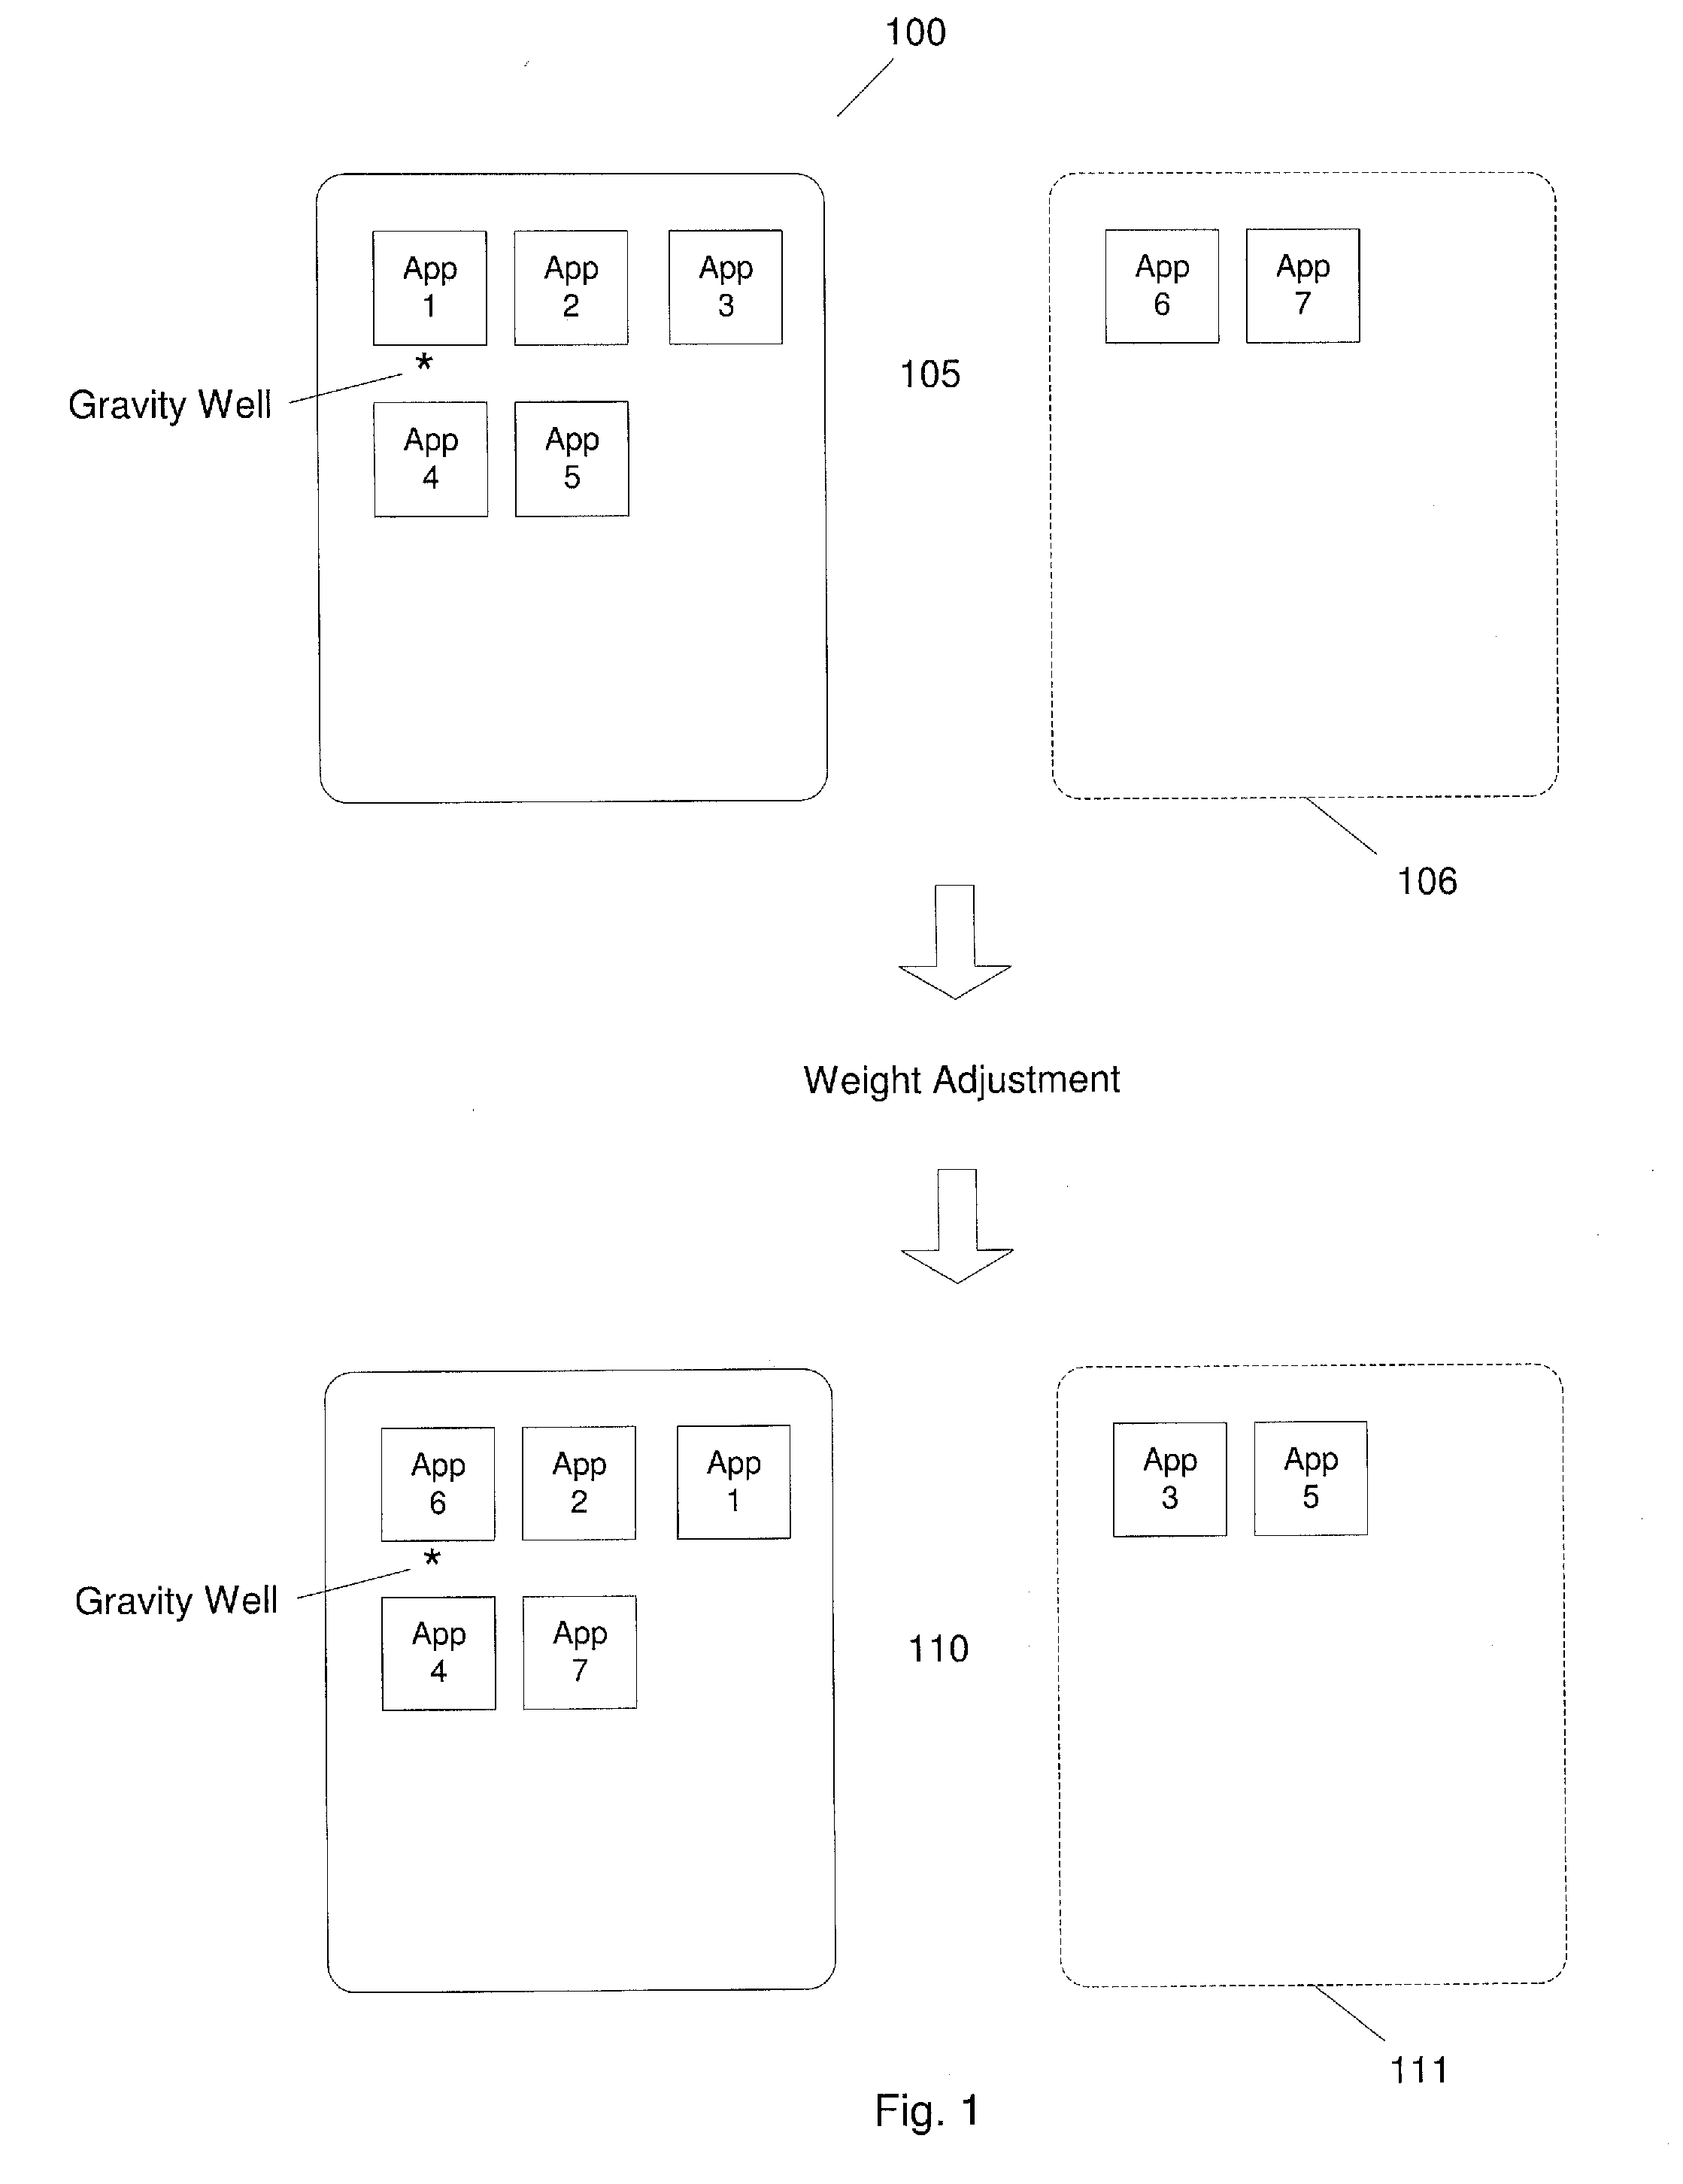 System and Method For Arranging Application Icons Of A User Interface On An Event-Triggered Basis